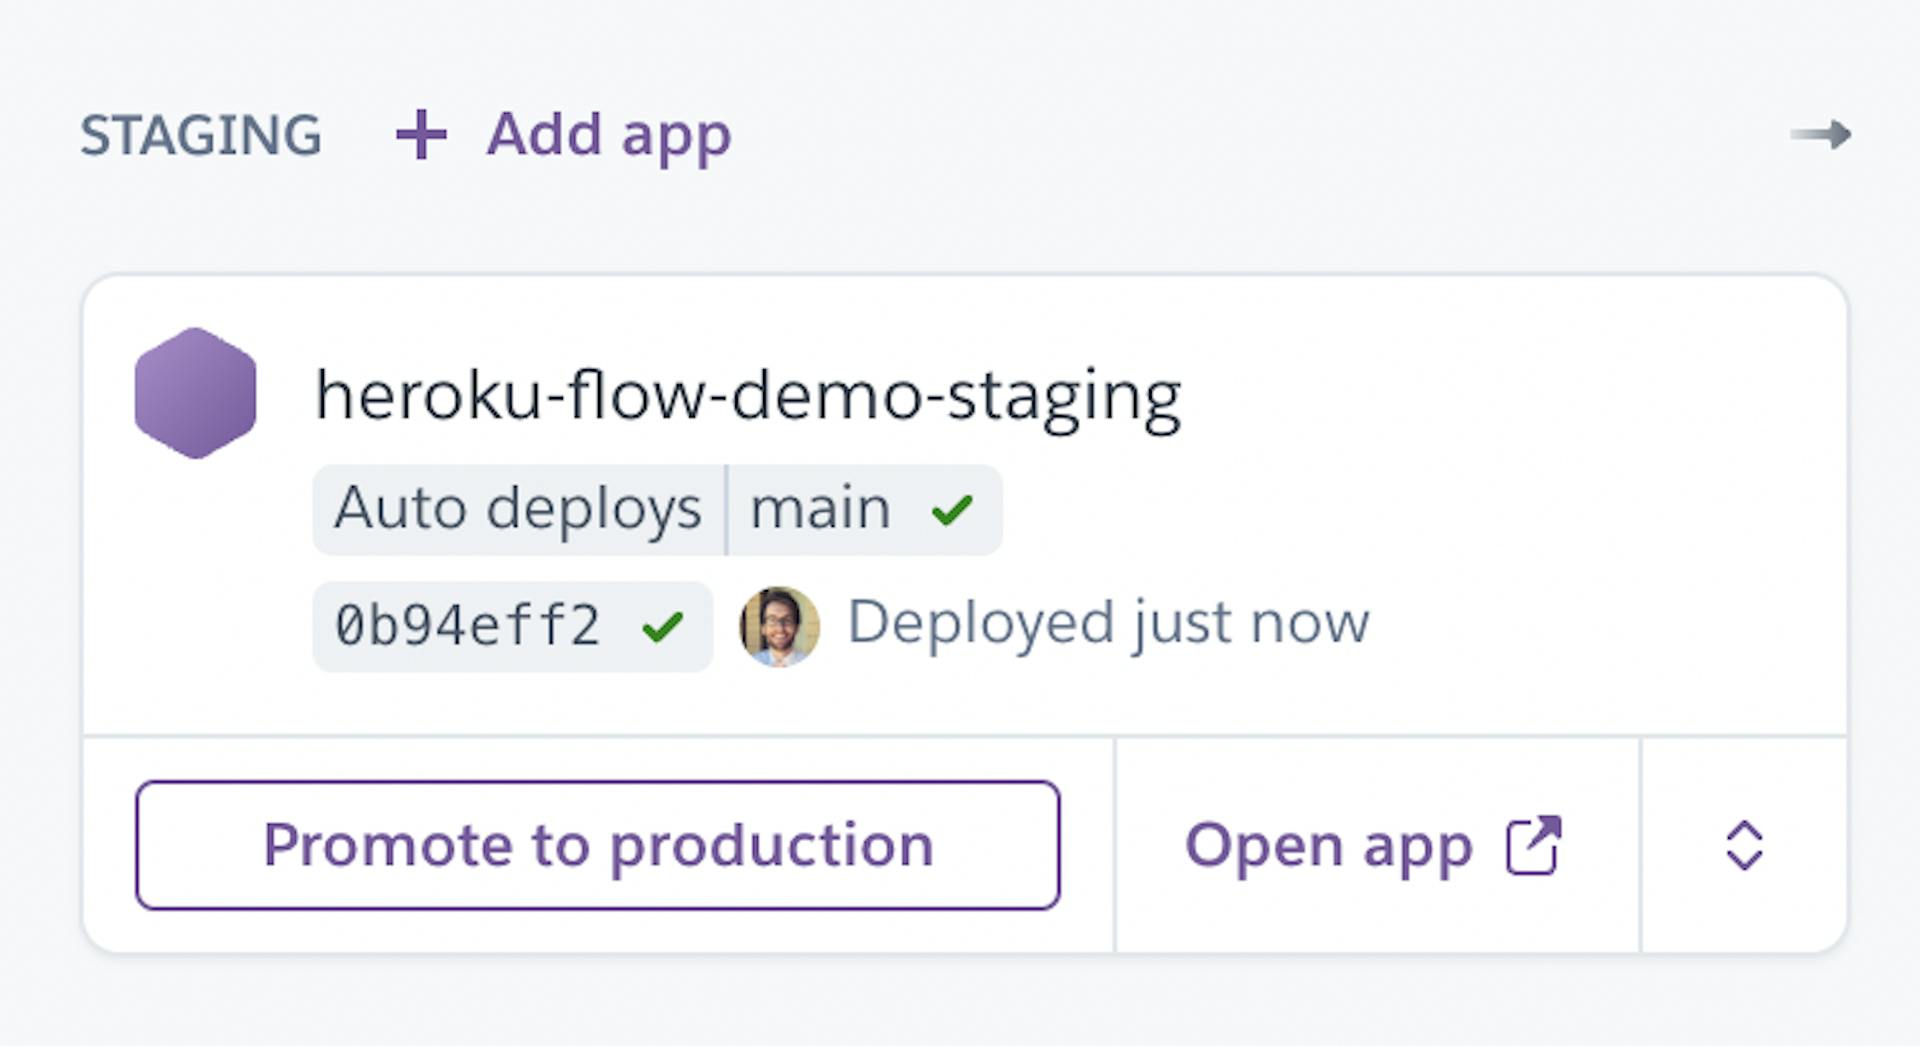 Staging app was automatically deployed